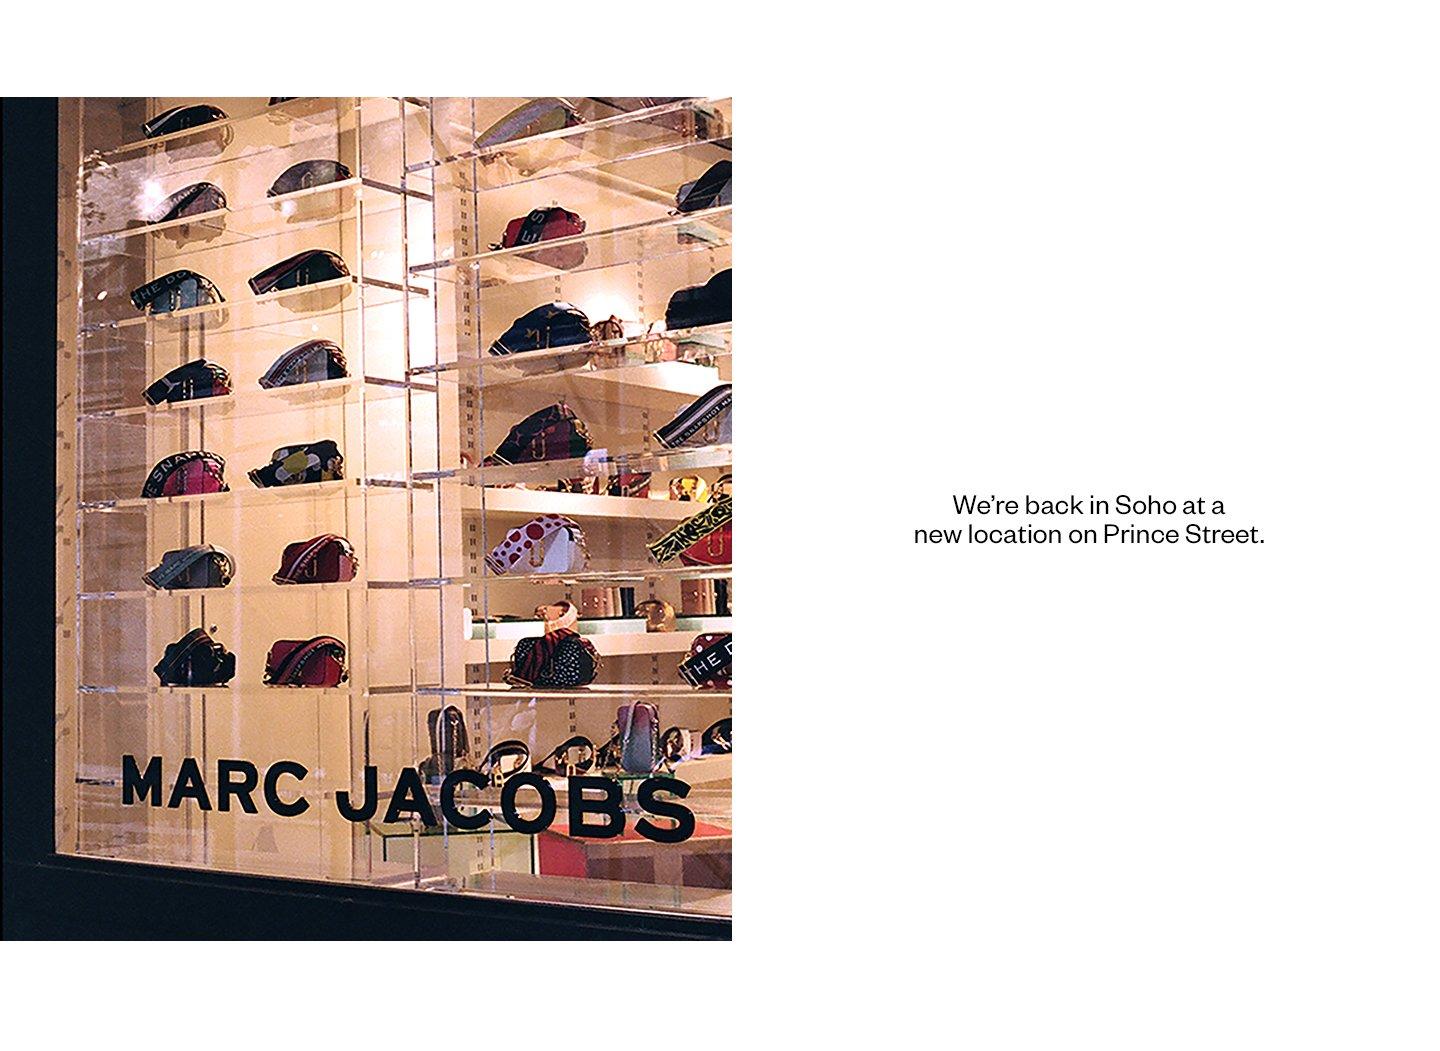 Marc Jacobs: shoes and accessories at outlet prices